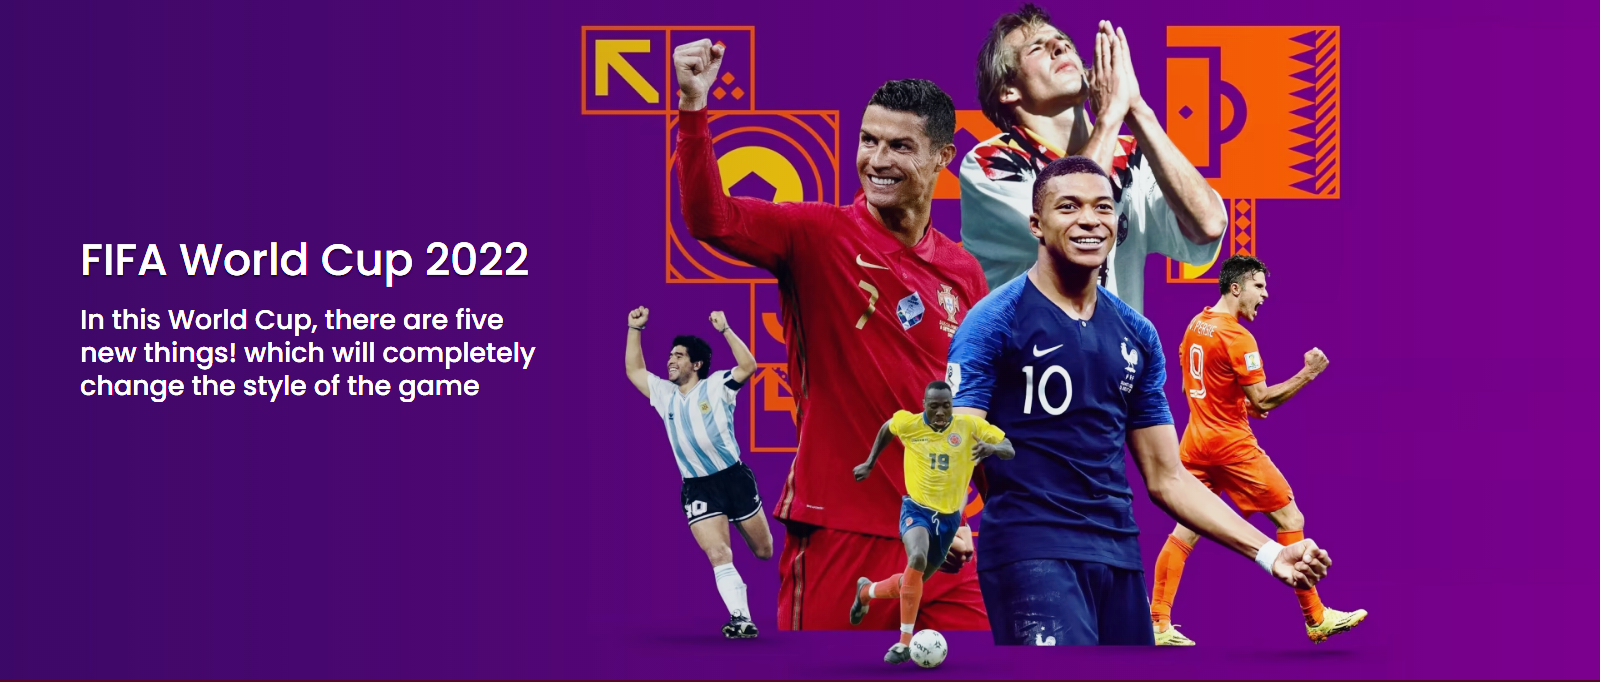 FIFA World Cup 2022: In this World Cup, there are five new things! which will completely change the style of the game